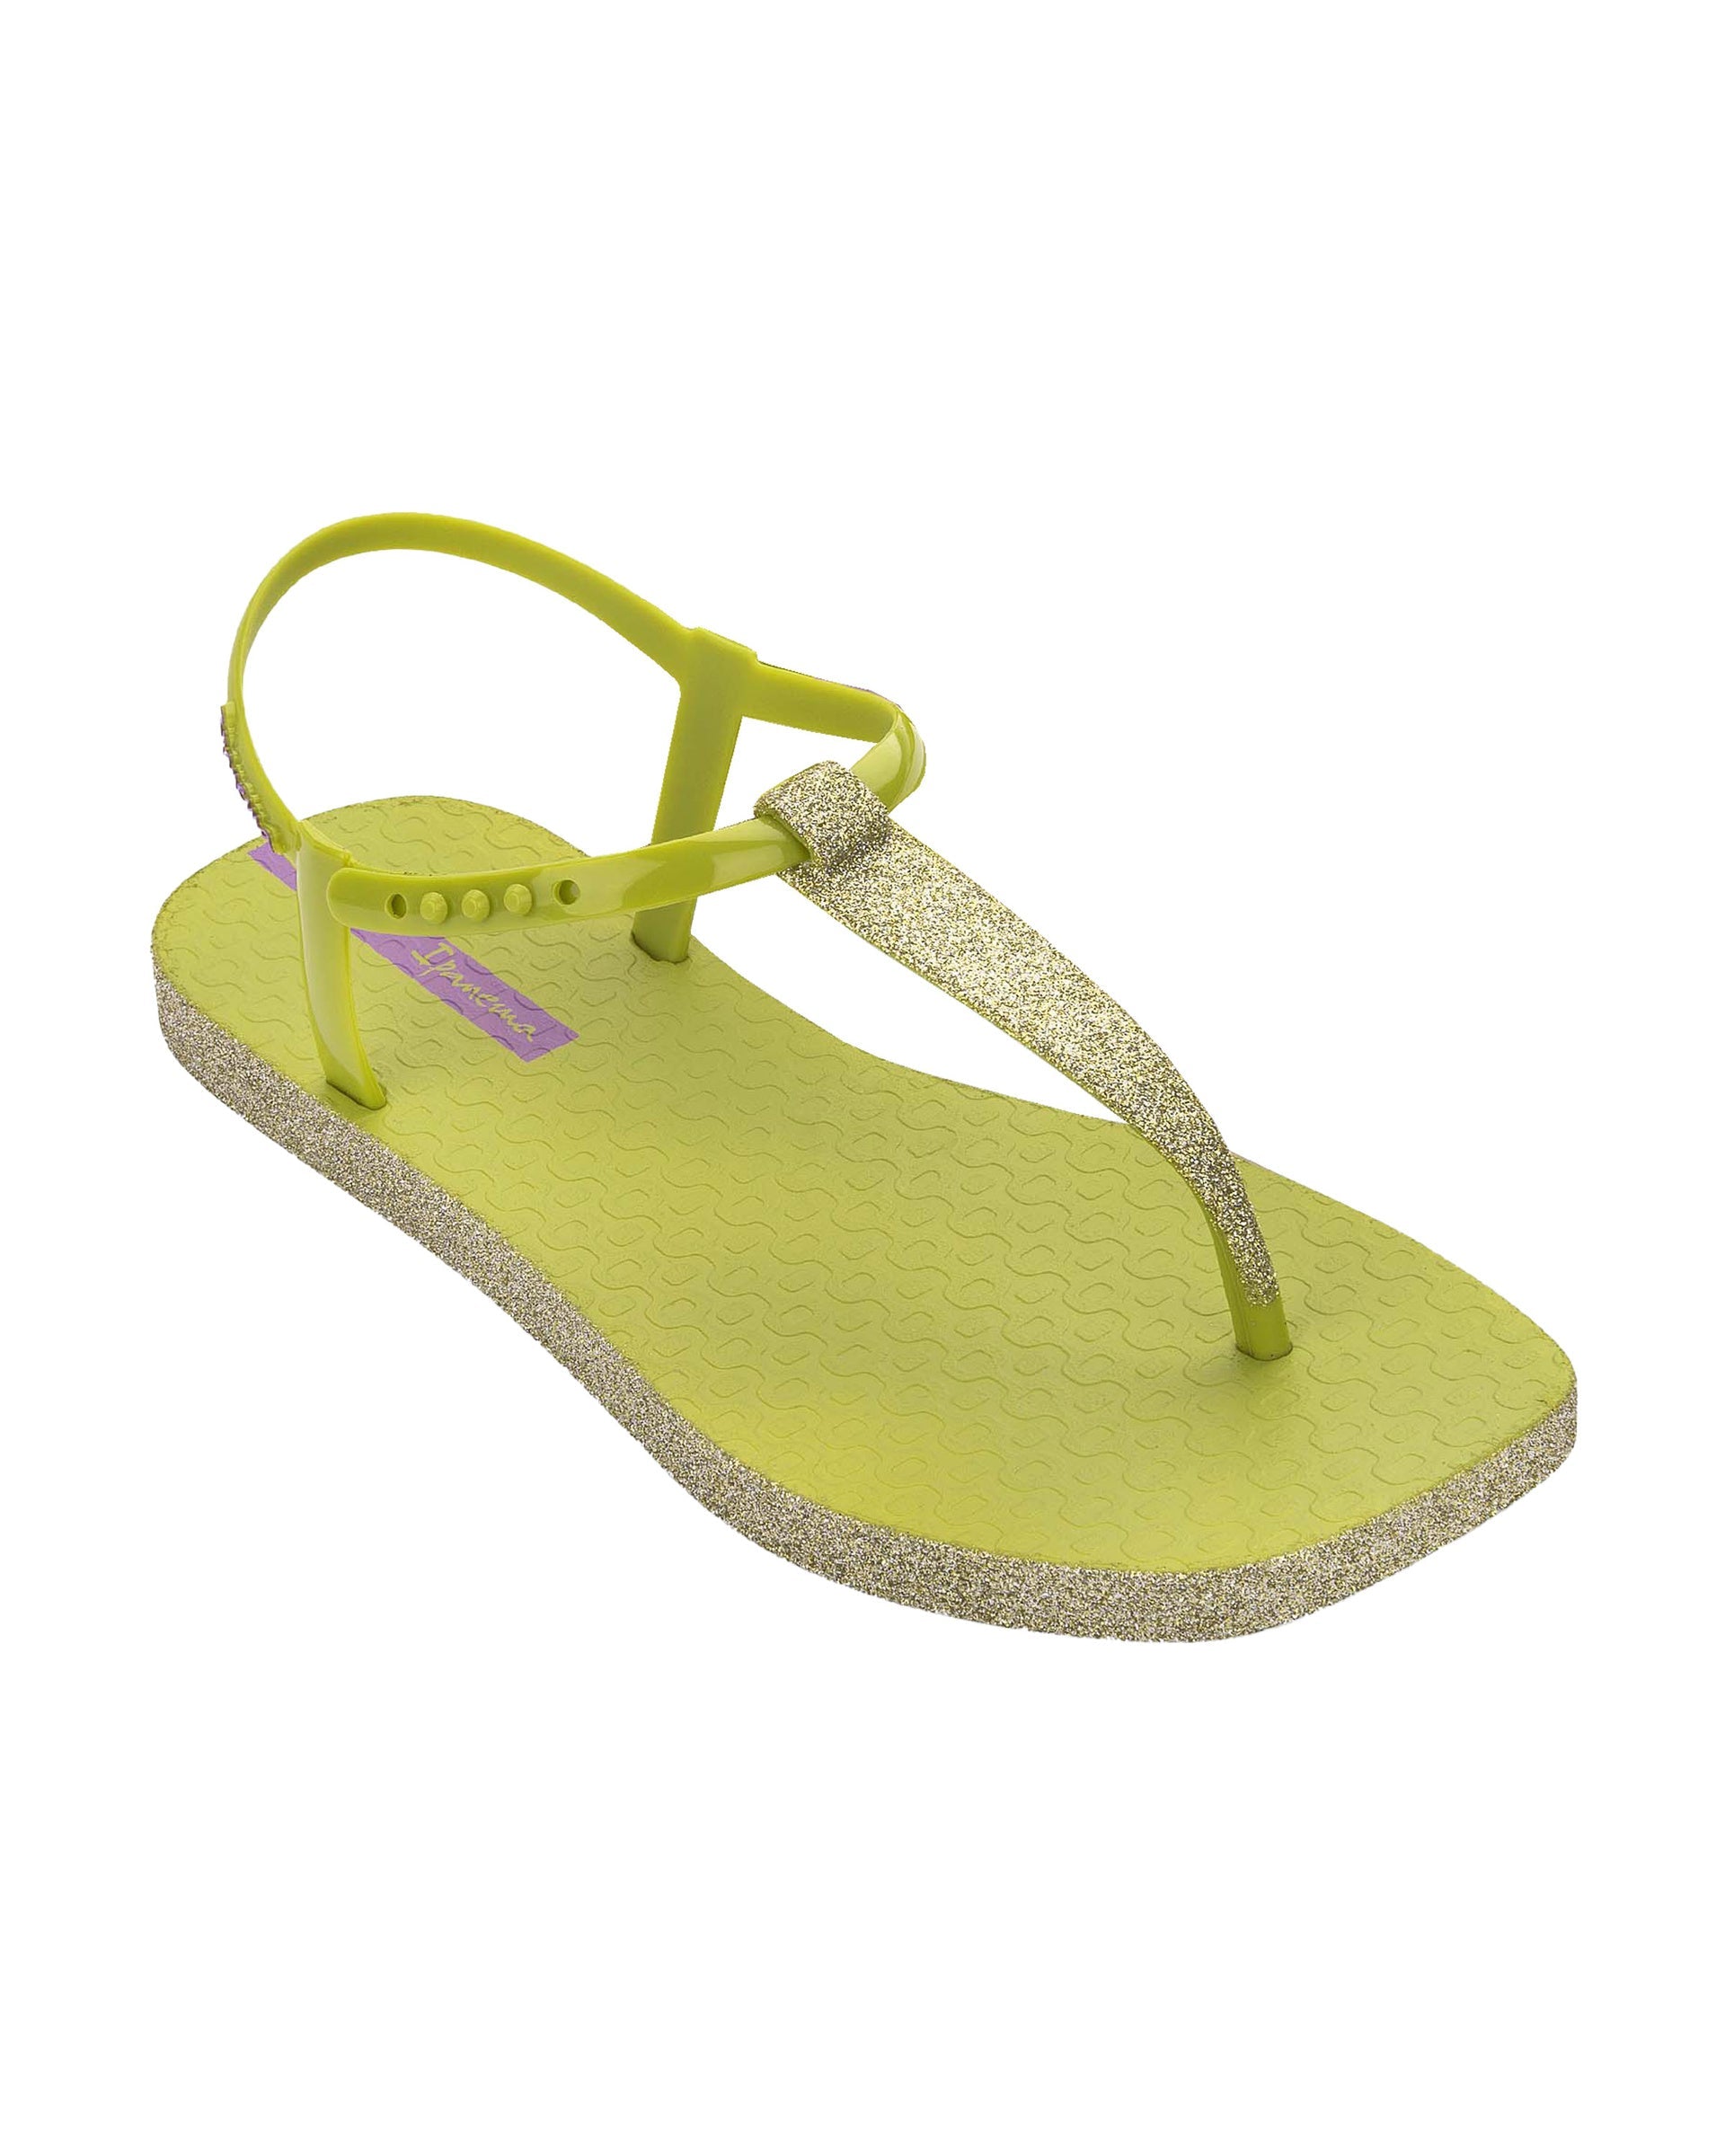 Angled view of a green Ipanema Class Edge Glow t-strap women's sandal with glitter green thong.